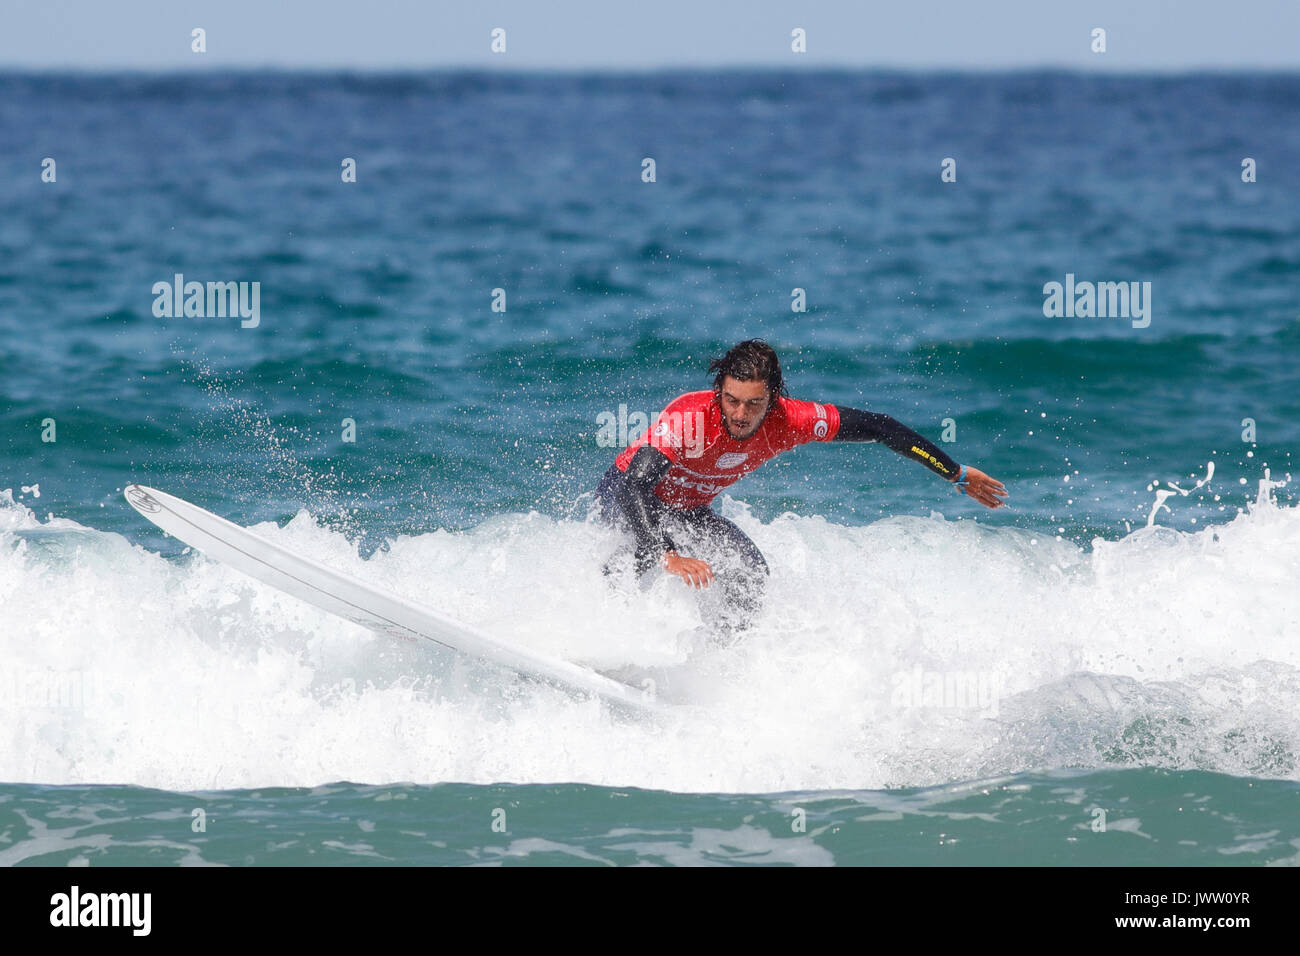 Fistral Beach, Newquay, Cornwall, UK. 13th Aug, 2017. Surfers take part in Day 5 of the Boardmasters Championship. This featured longboard surfers from around the world. Credit: Nicholas Burningham/Alamy Live News Stock Photo